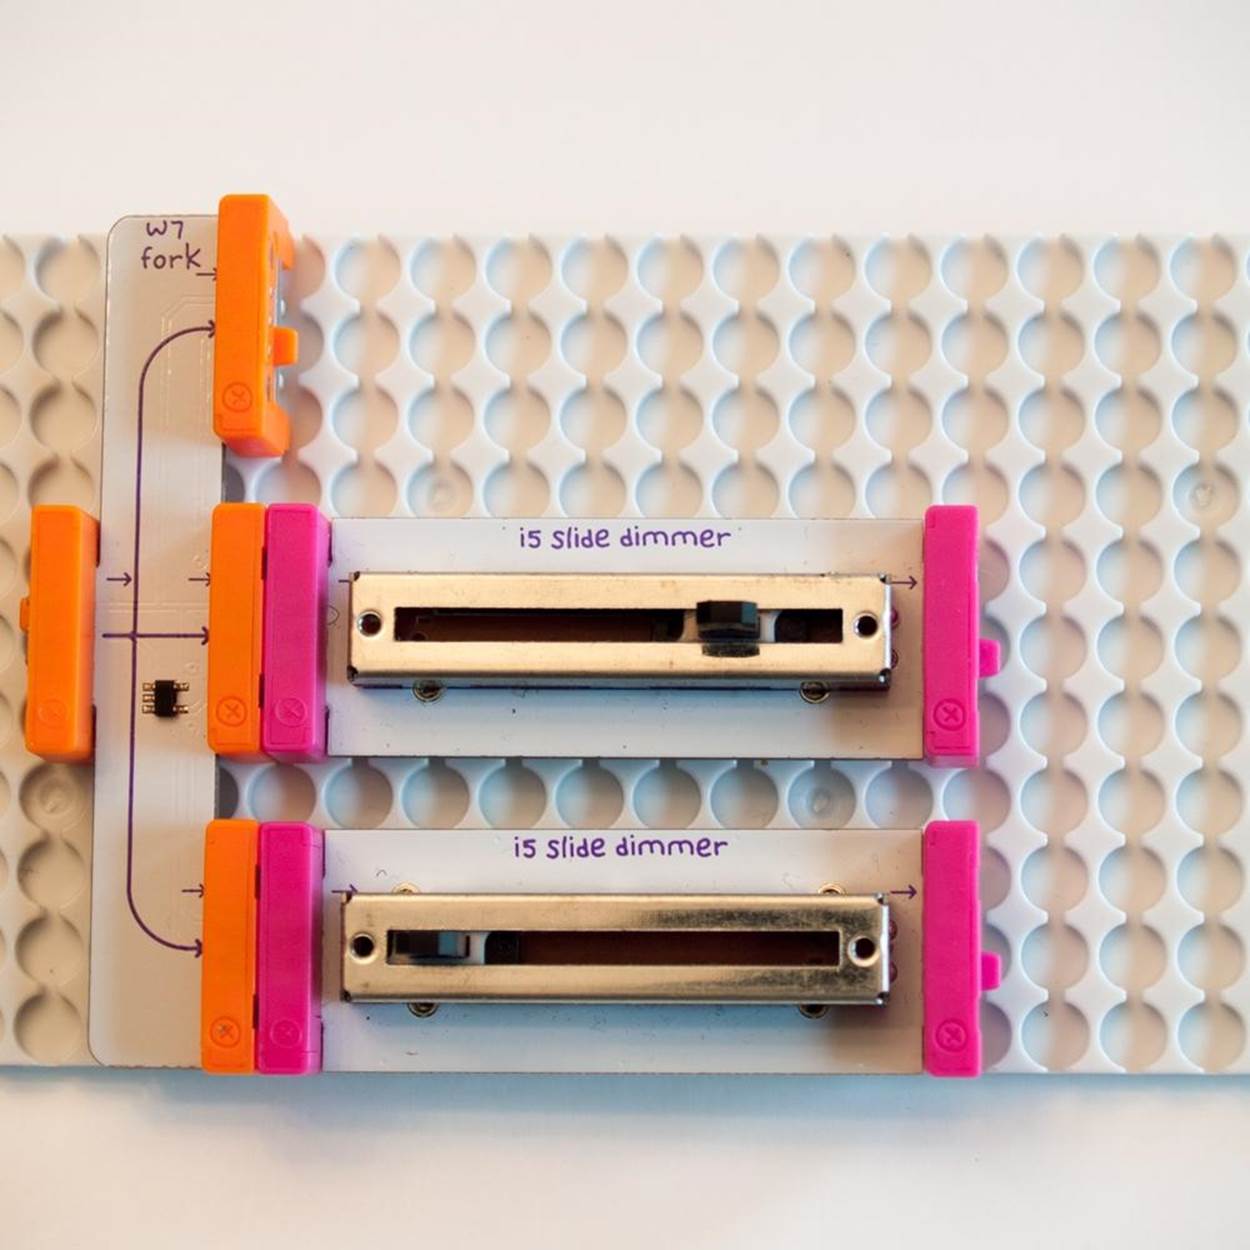 A littleBits Fork and two Slide Dimmers on a Mounting Board